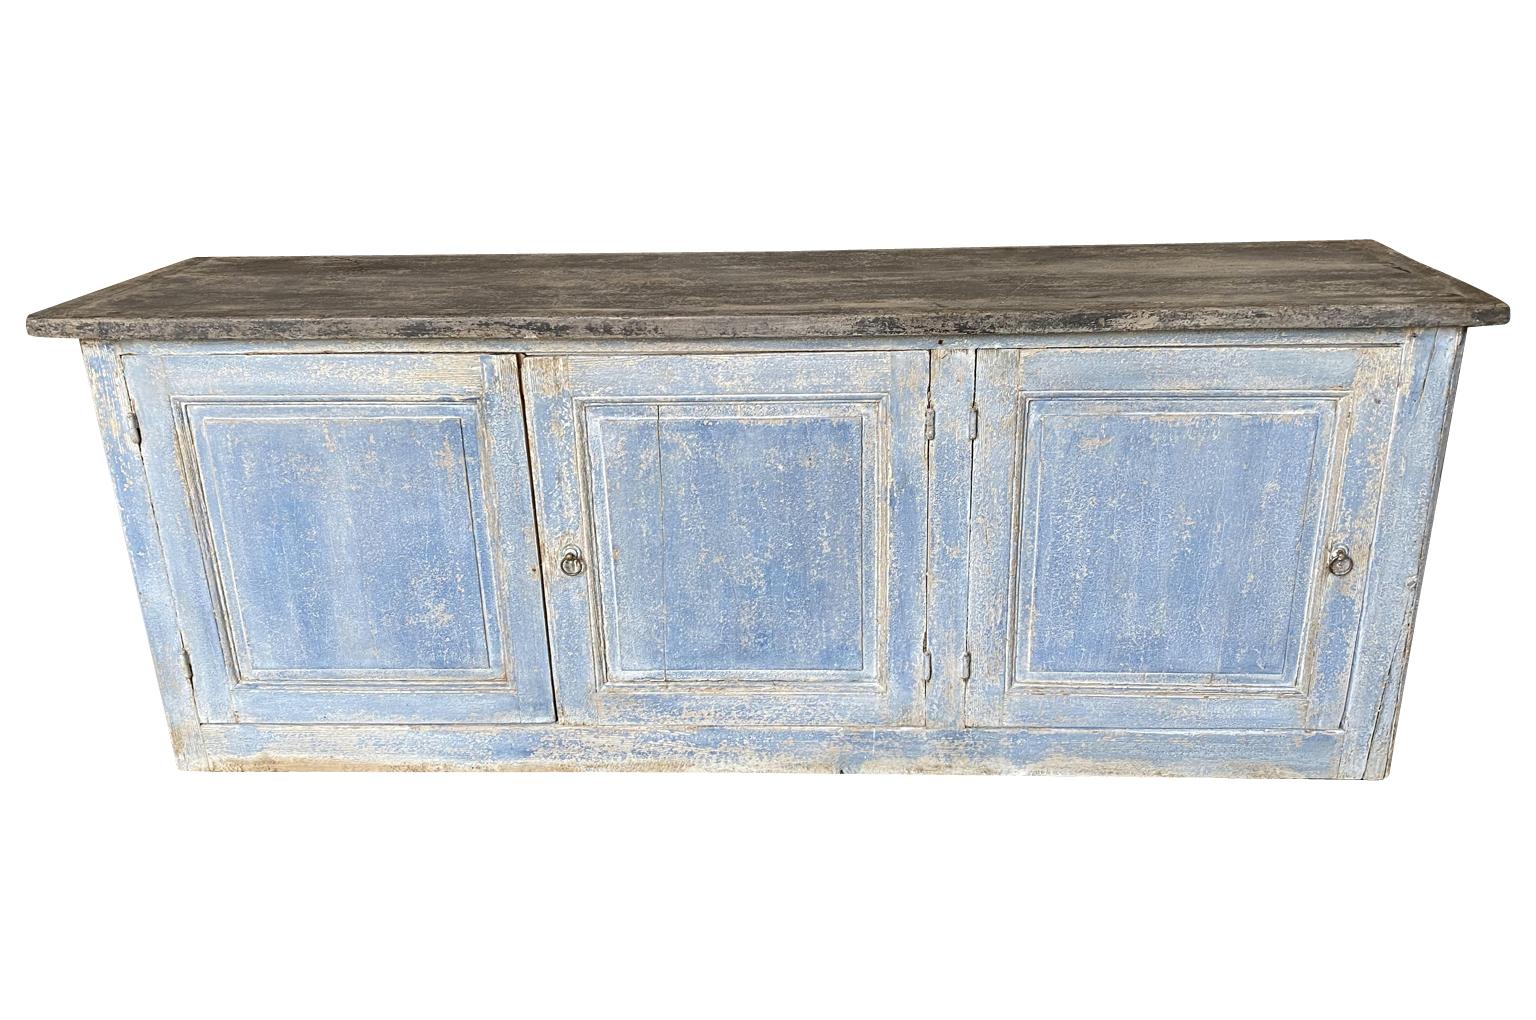 A wonderful mid-19th century buffet, enfilade from the South of France. Soundly constructed from painted wood with 3 doors and an interior shelf. A wonderful serving and storage piece.